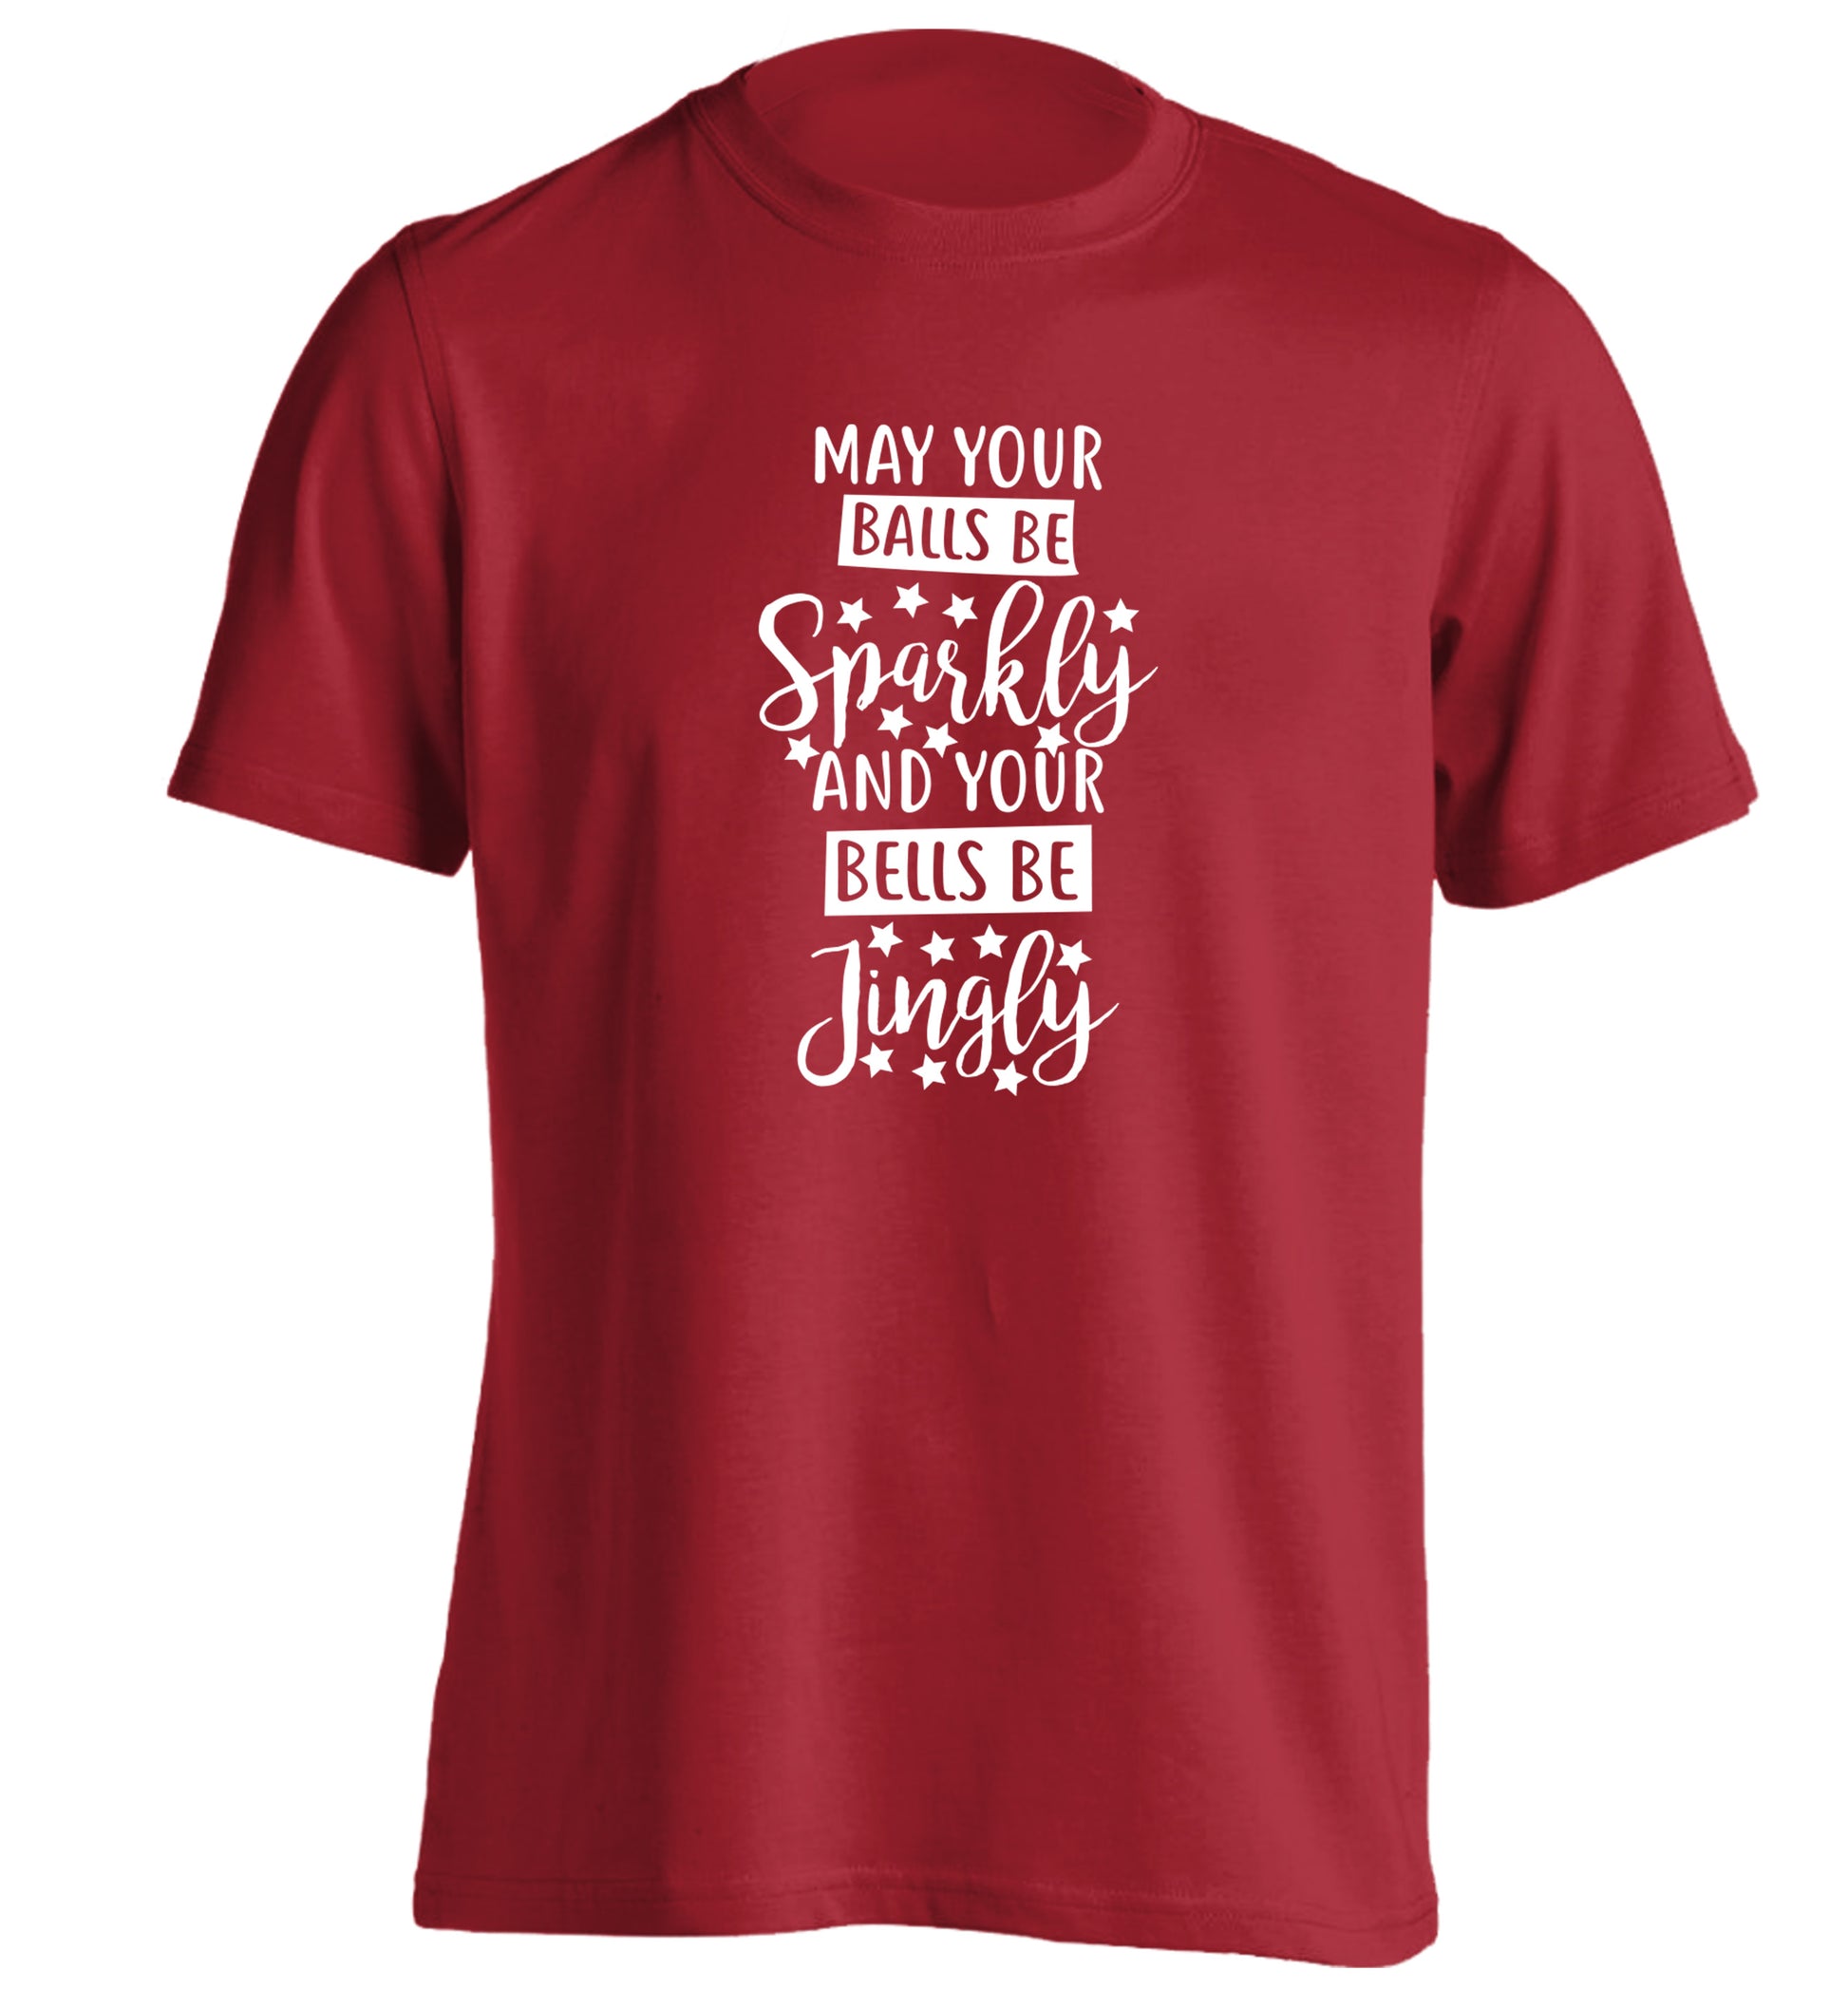 May your balls be sparkly and your bells be jingly adults unisex red Tshirt 2XL